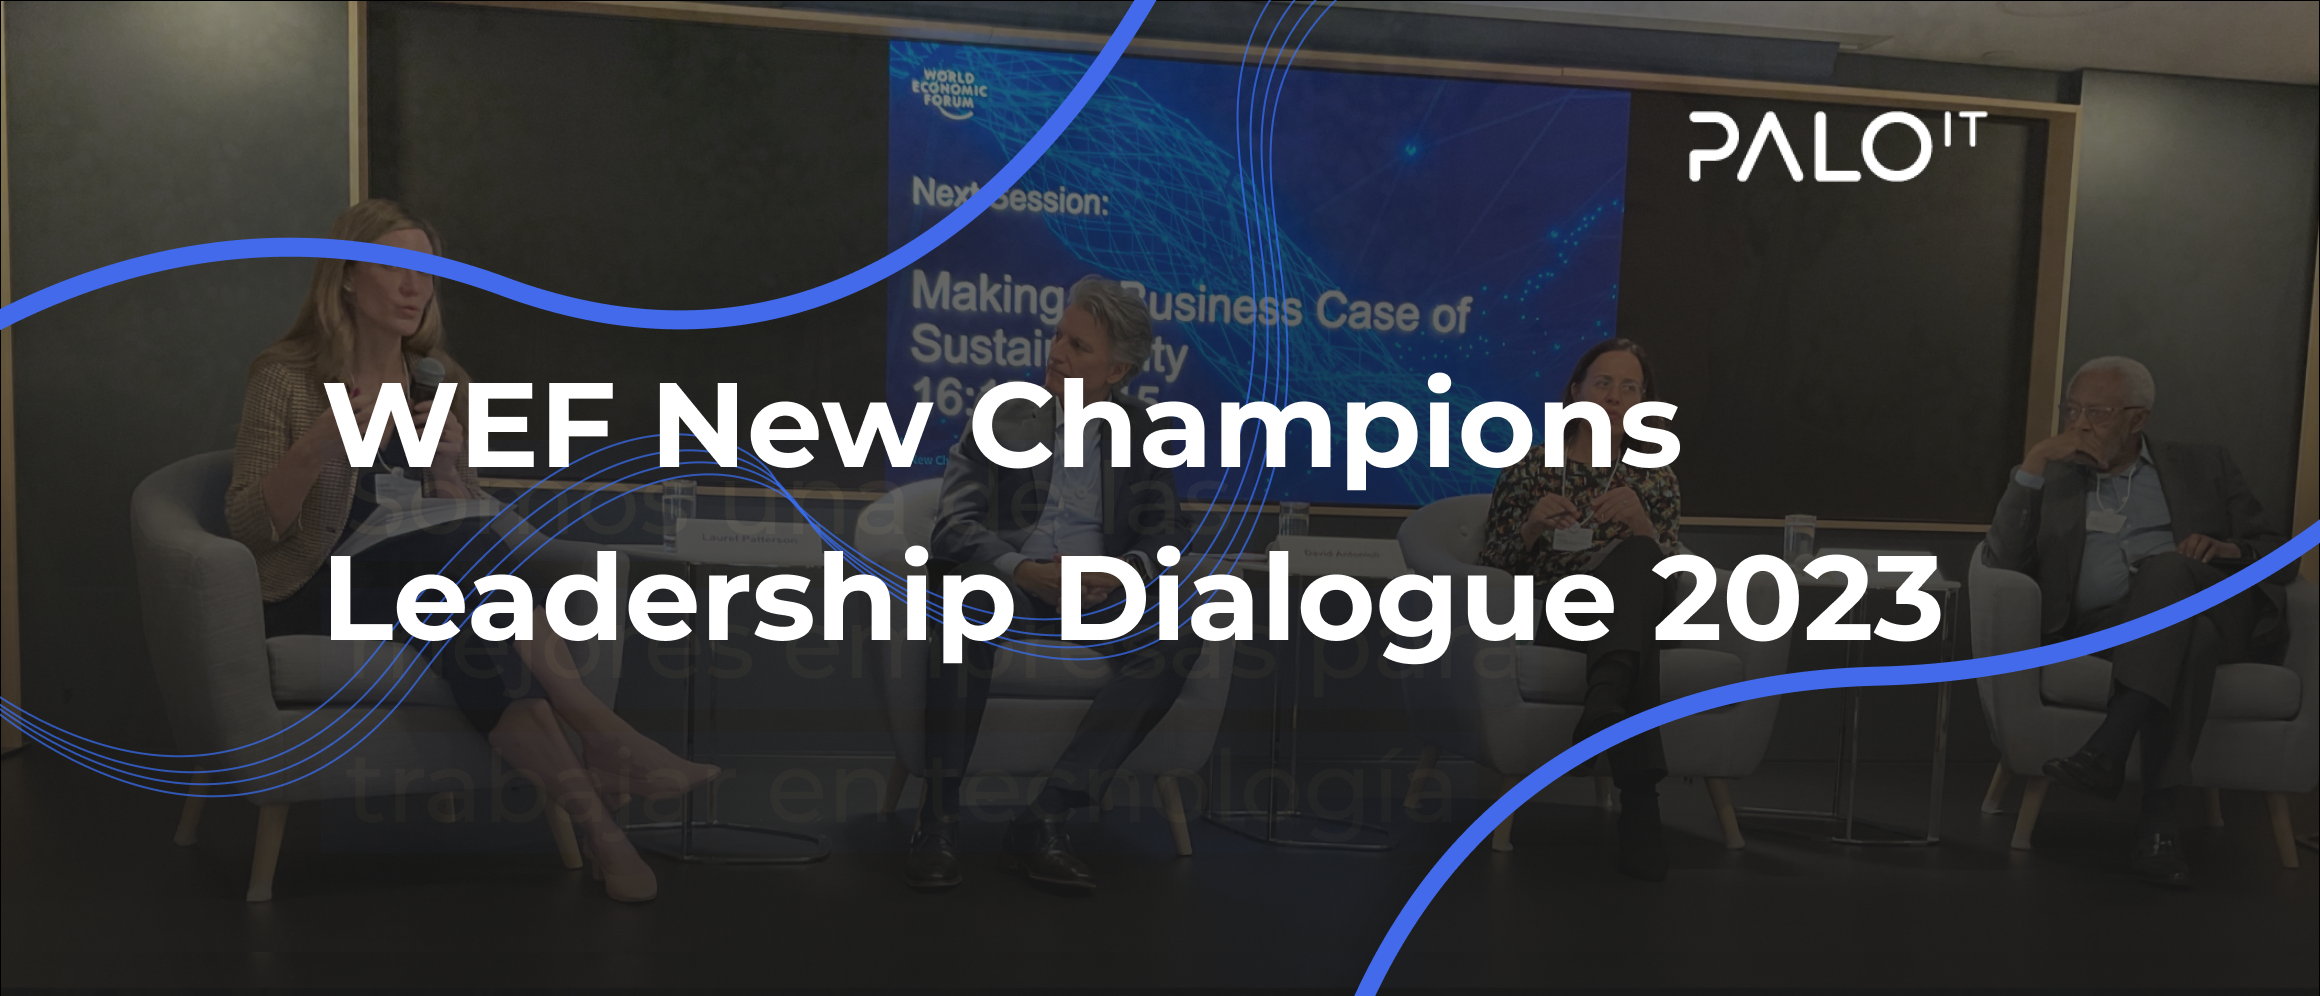 WEF New Champions Leadership Dialogue 2023